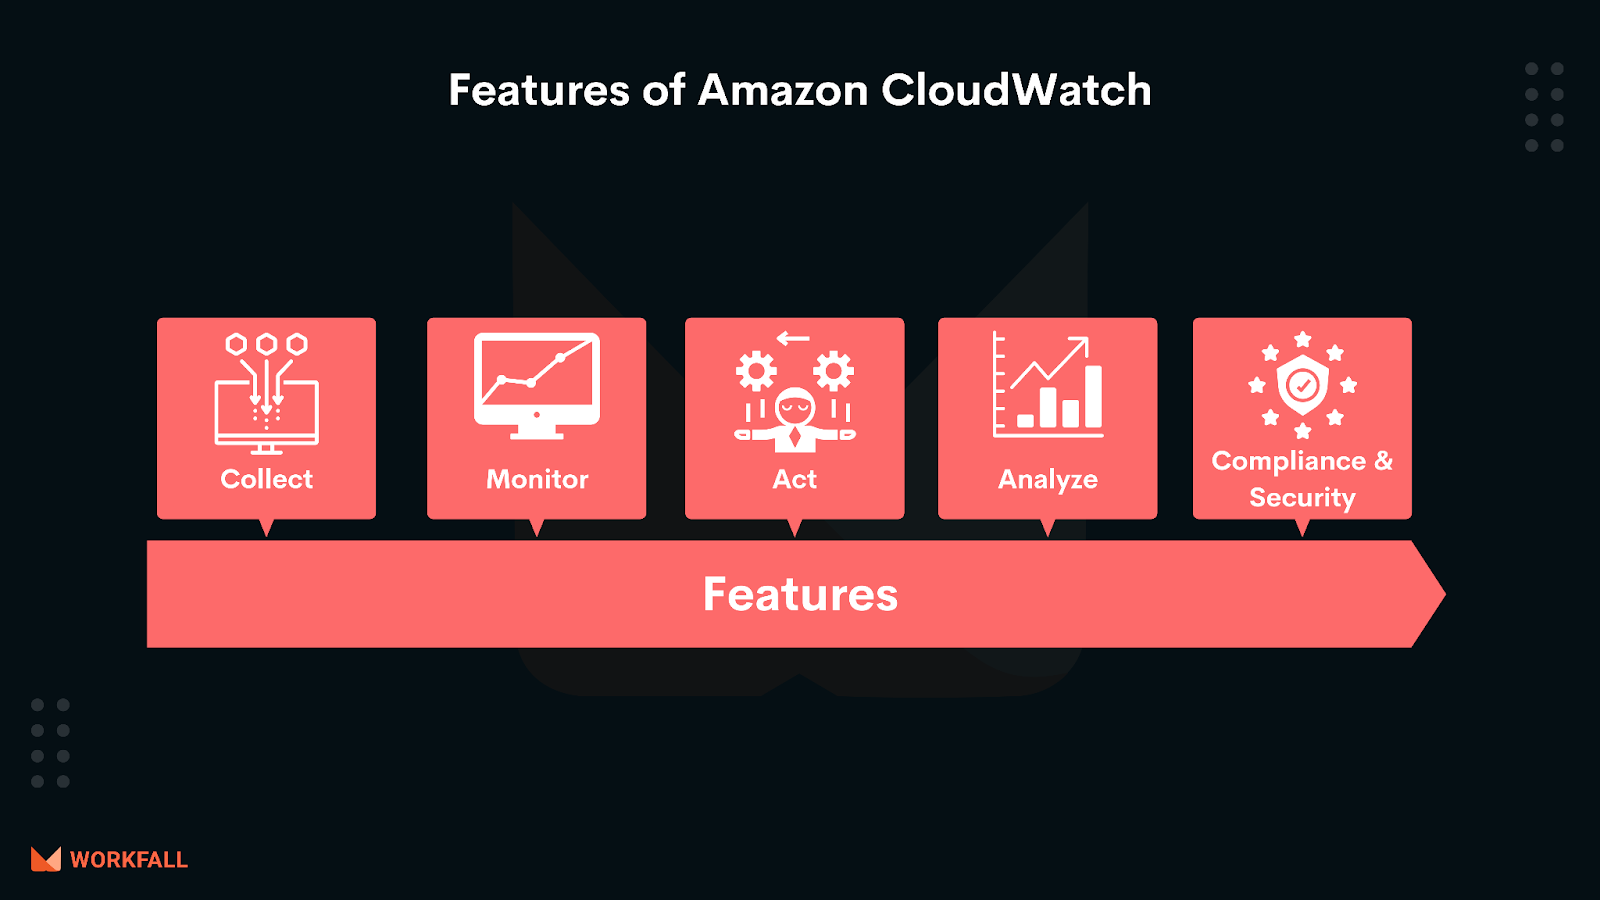 Features of Amazon CloudWatch